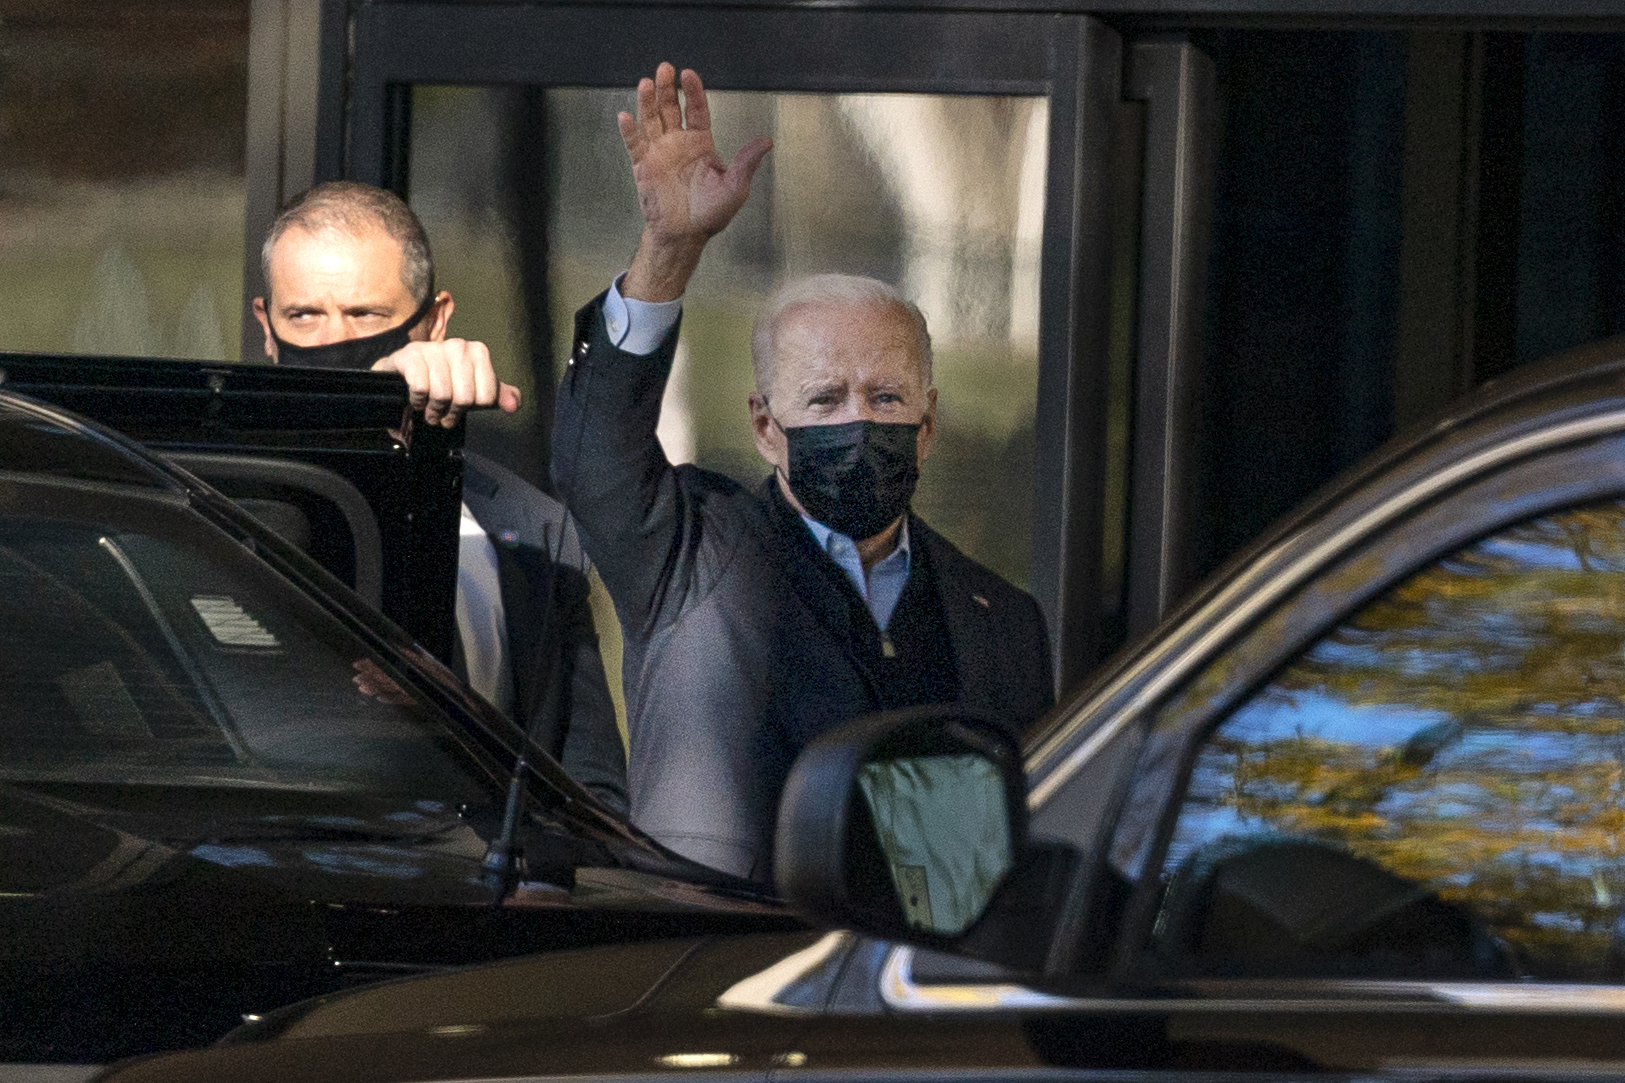 President Joe Biden arrives at Walter Reed National Military Medical Center for a physical exam, Friday, Nov. 19, 2021, in Bethesda, Md. (AP Photo/Evan Vucci)